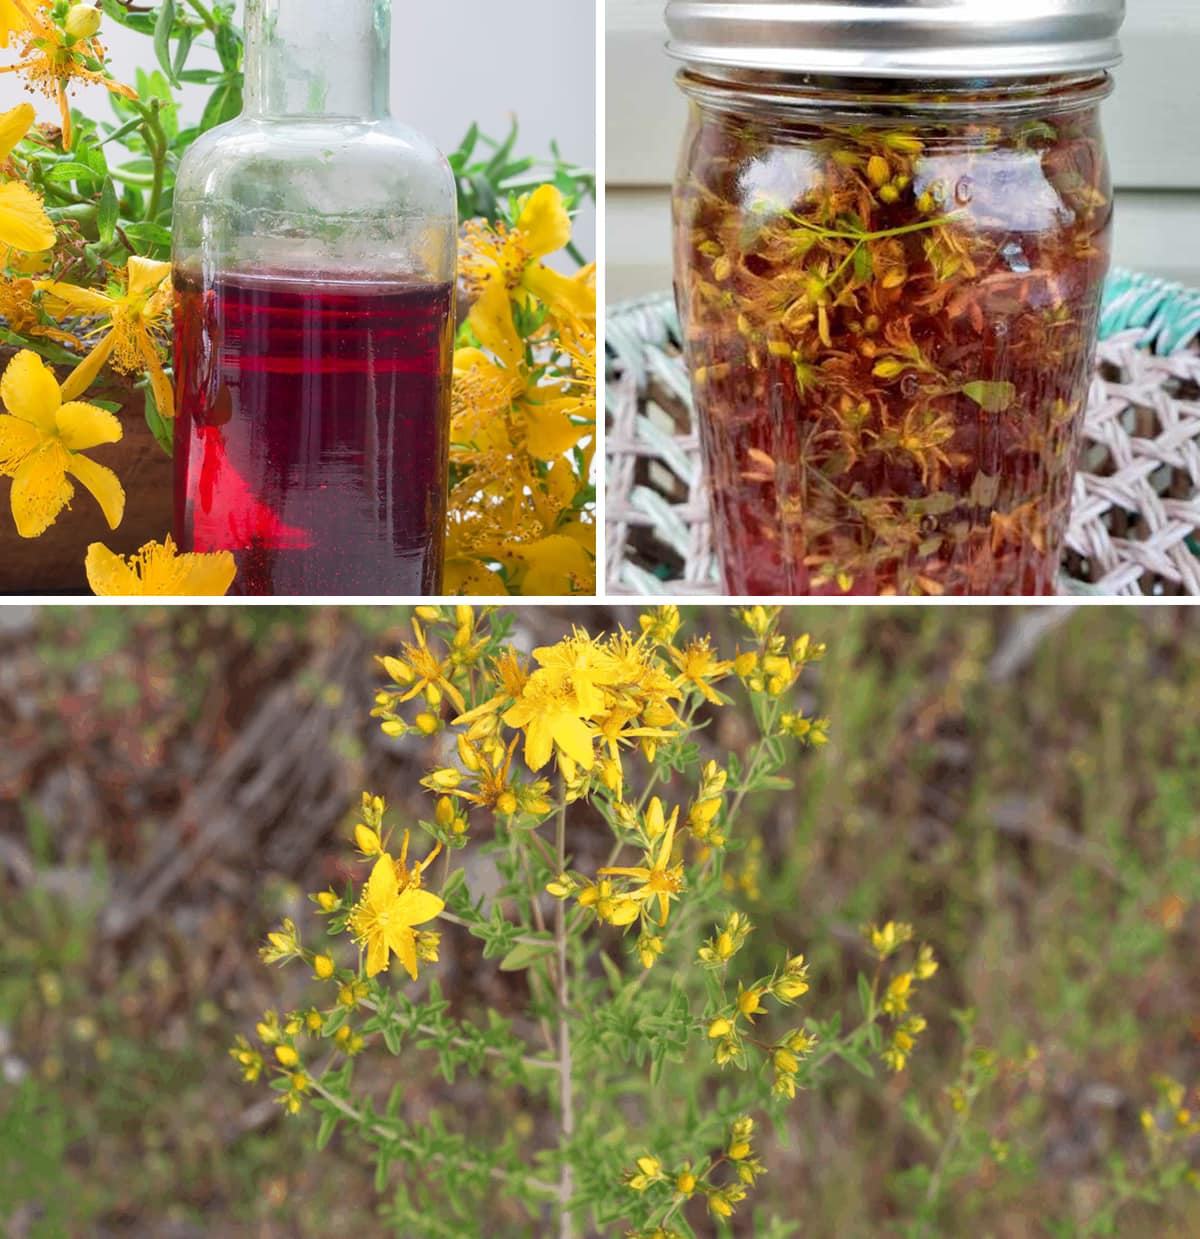 John’s wort and how it can be used wonderful benefits